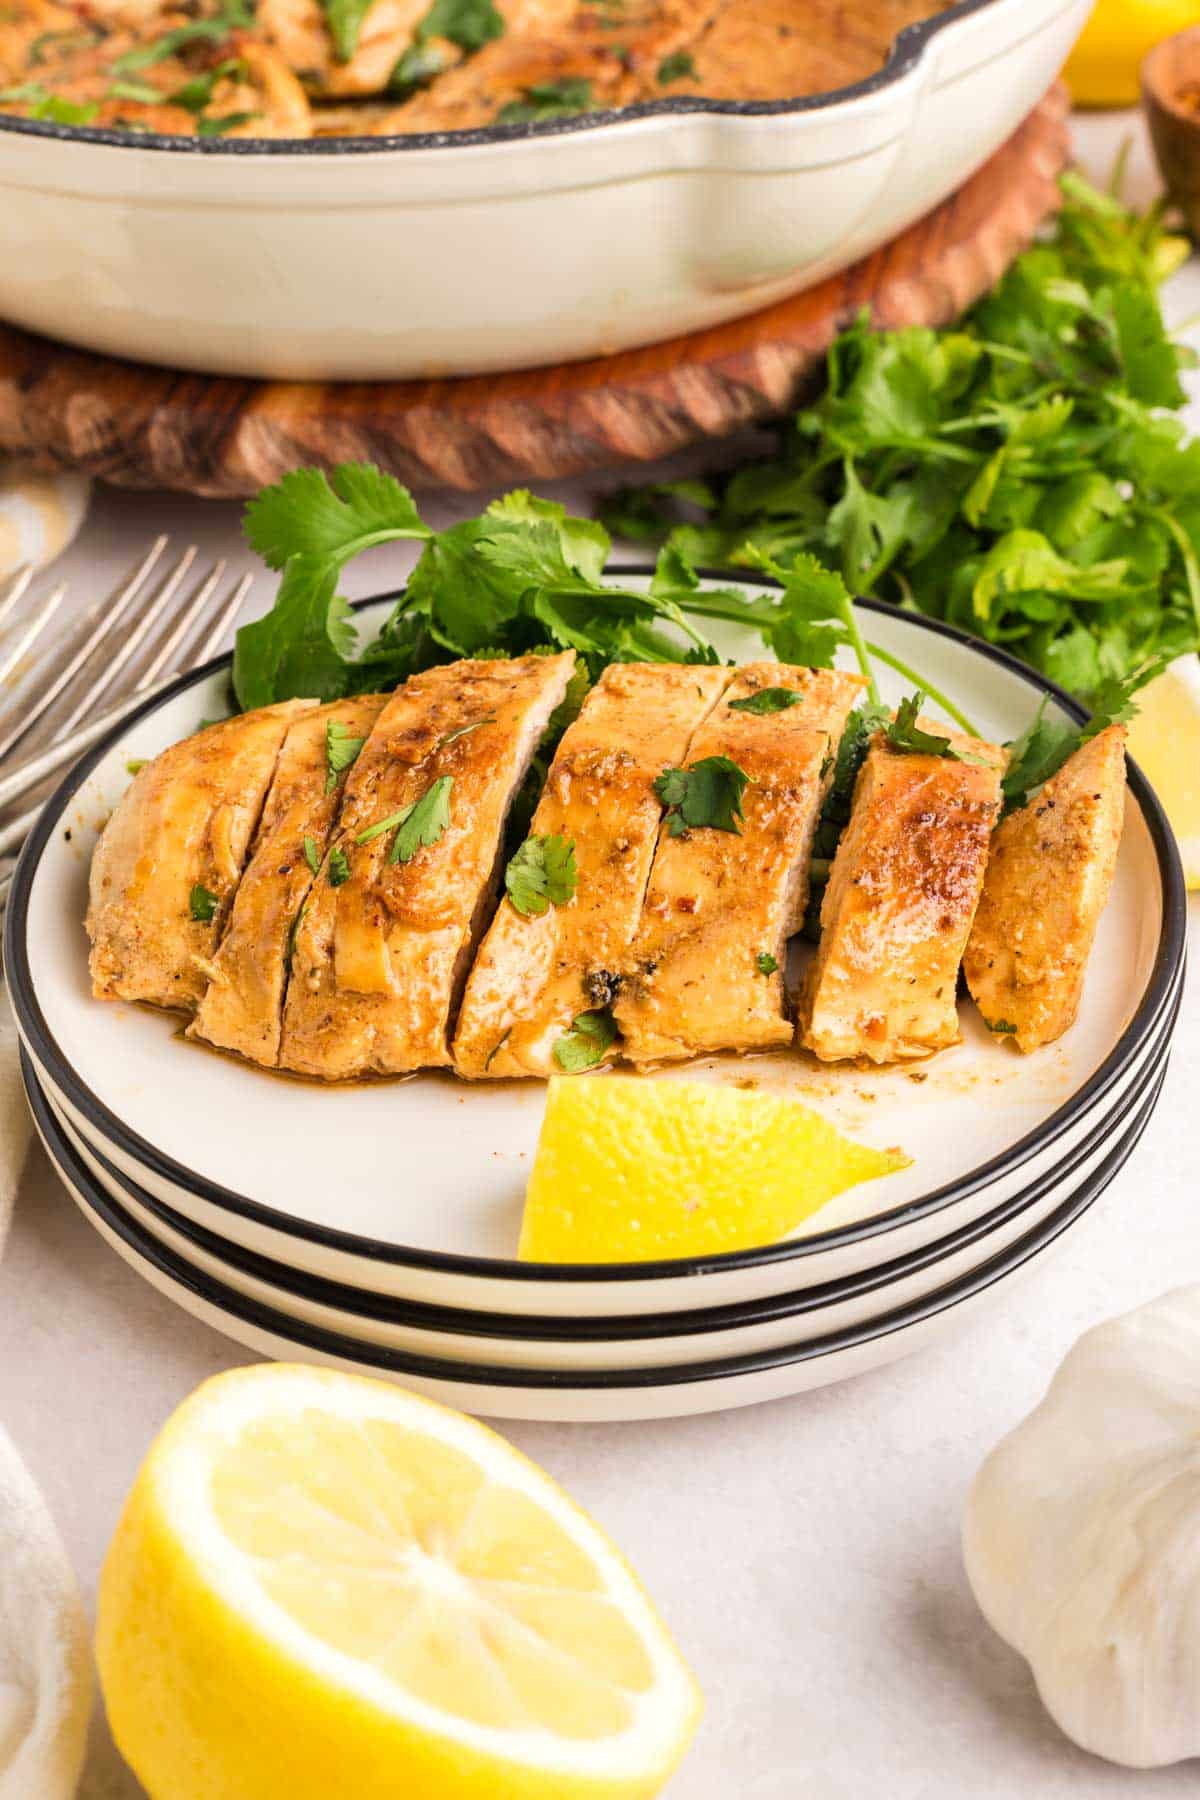 A slice pan fried greek chicken breast on a white plate with a slice of lemon.